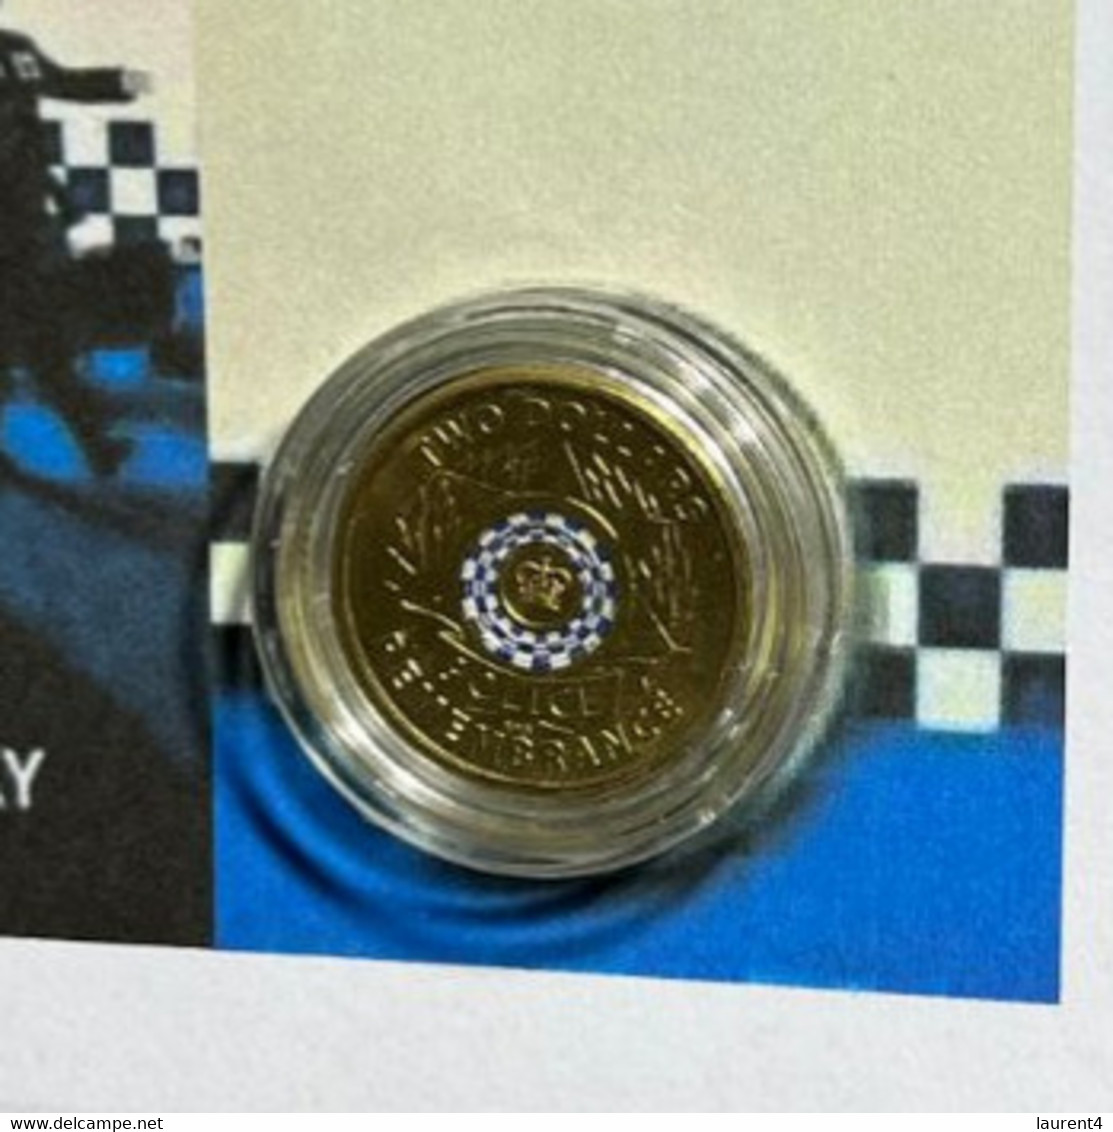 (4 M 27) 2019 Australian National Police Remembrance Coin On Cover With COVID19 Police & Army Stamp - 2 Dollars